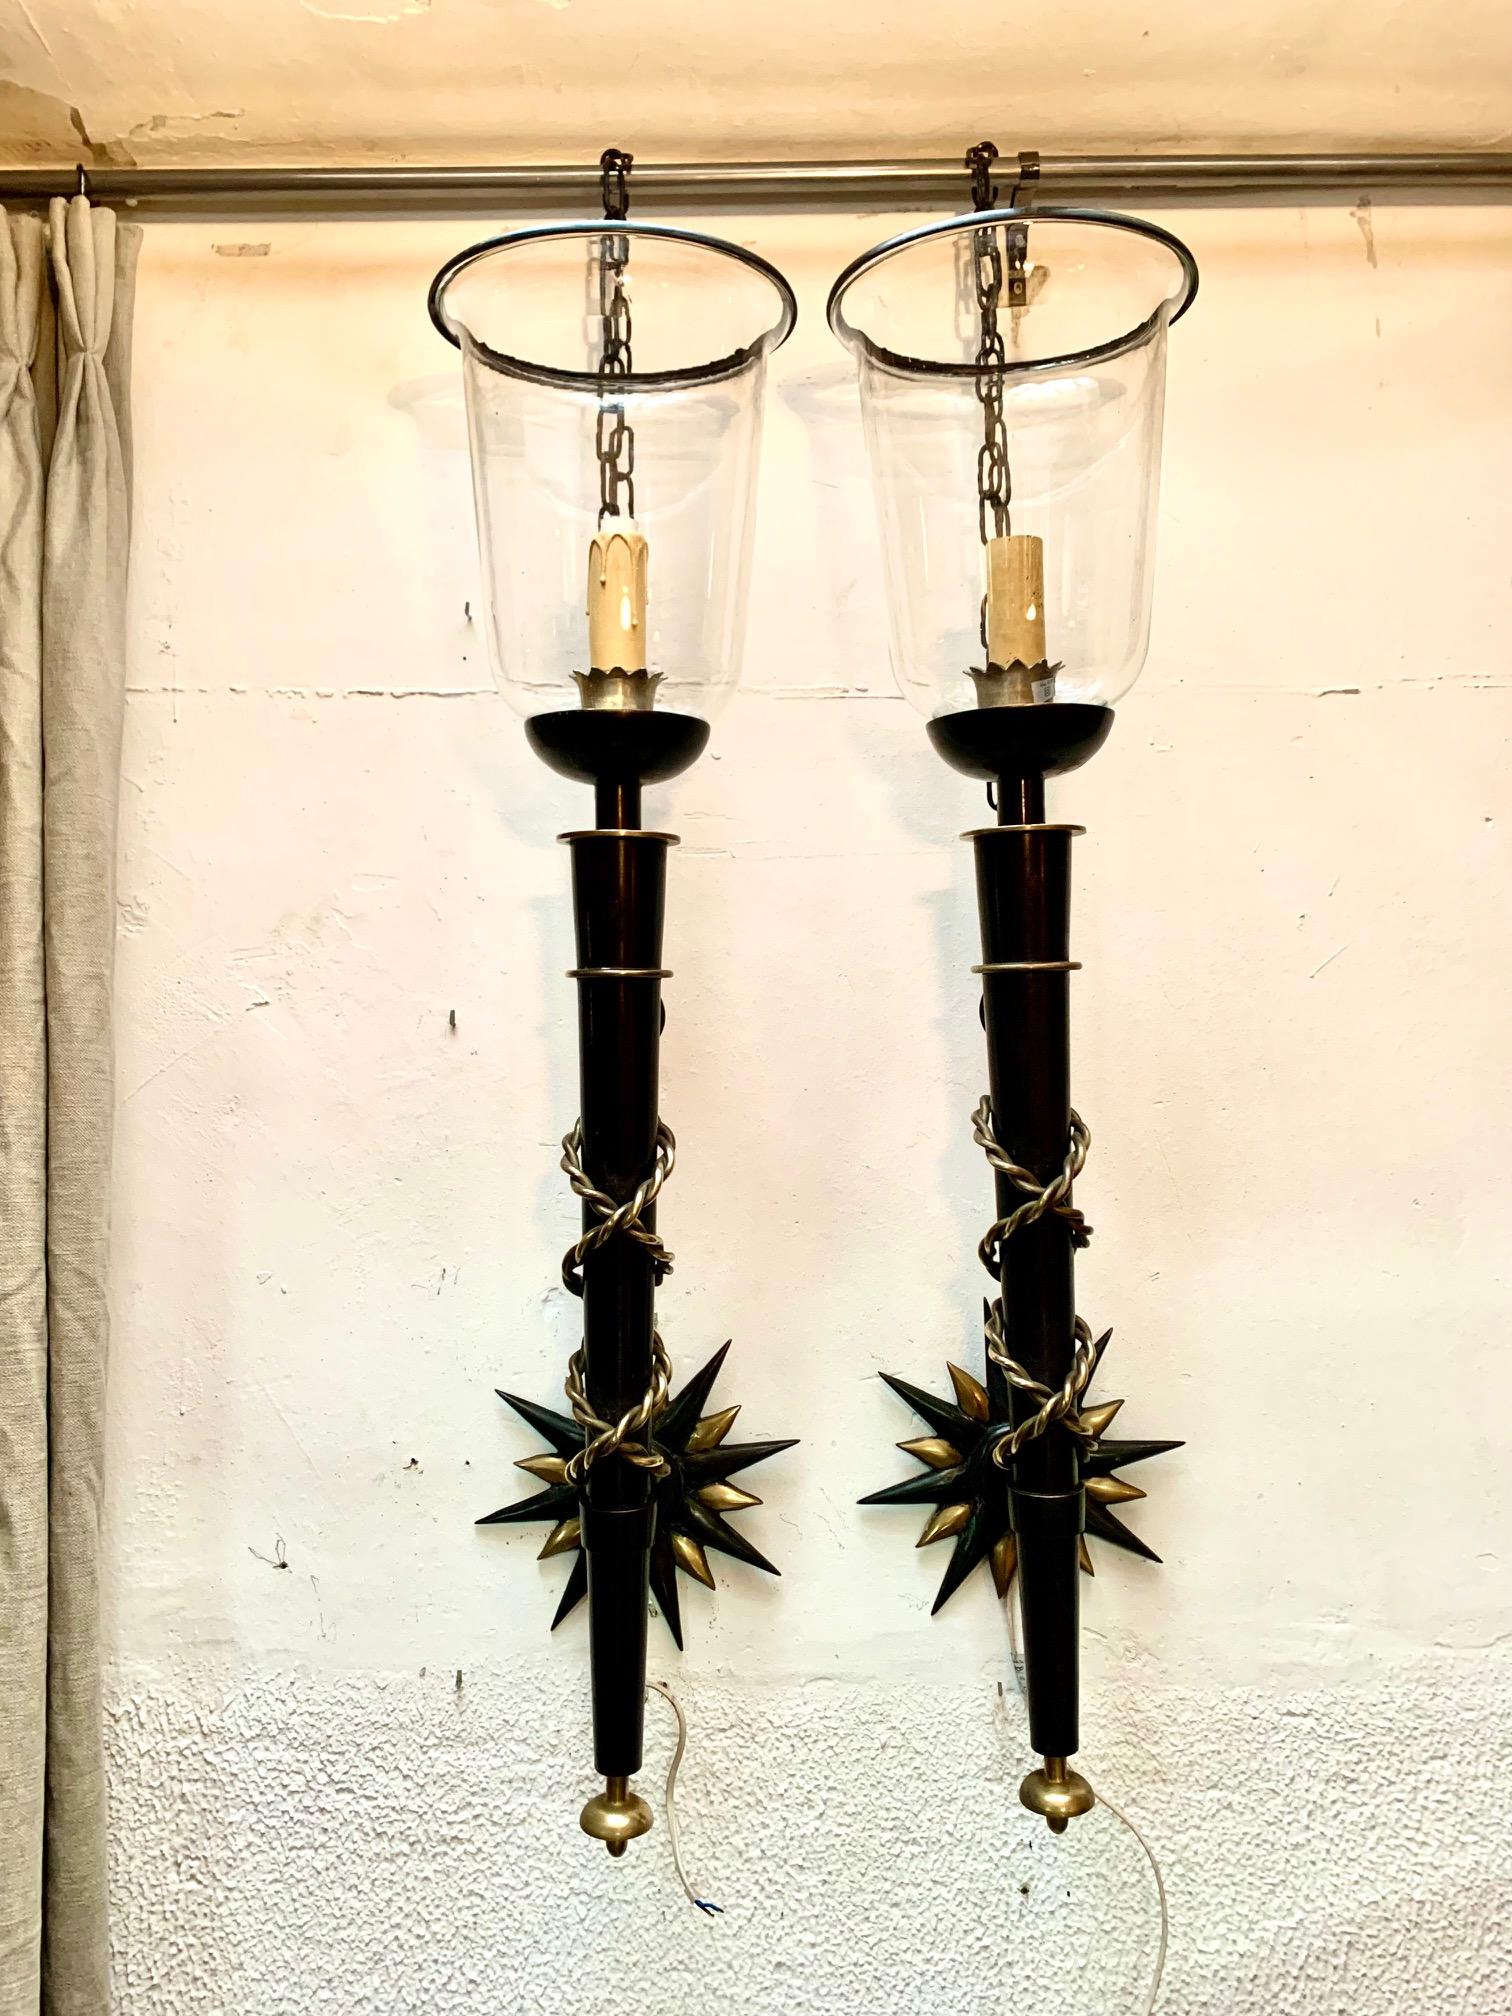 A pair of important and large torch-shaped wall sconces, these sconces follow the unmistakable style of Gilbert Poillerat, they are made of wrought iron and lacquer, combined with many other details in brass and bronze, The sconces rest on the wall